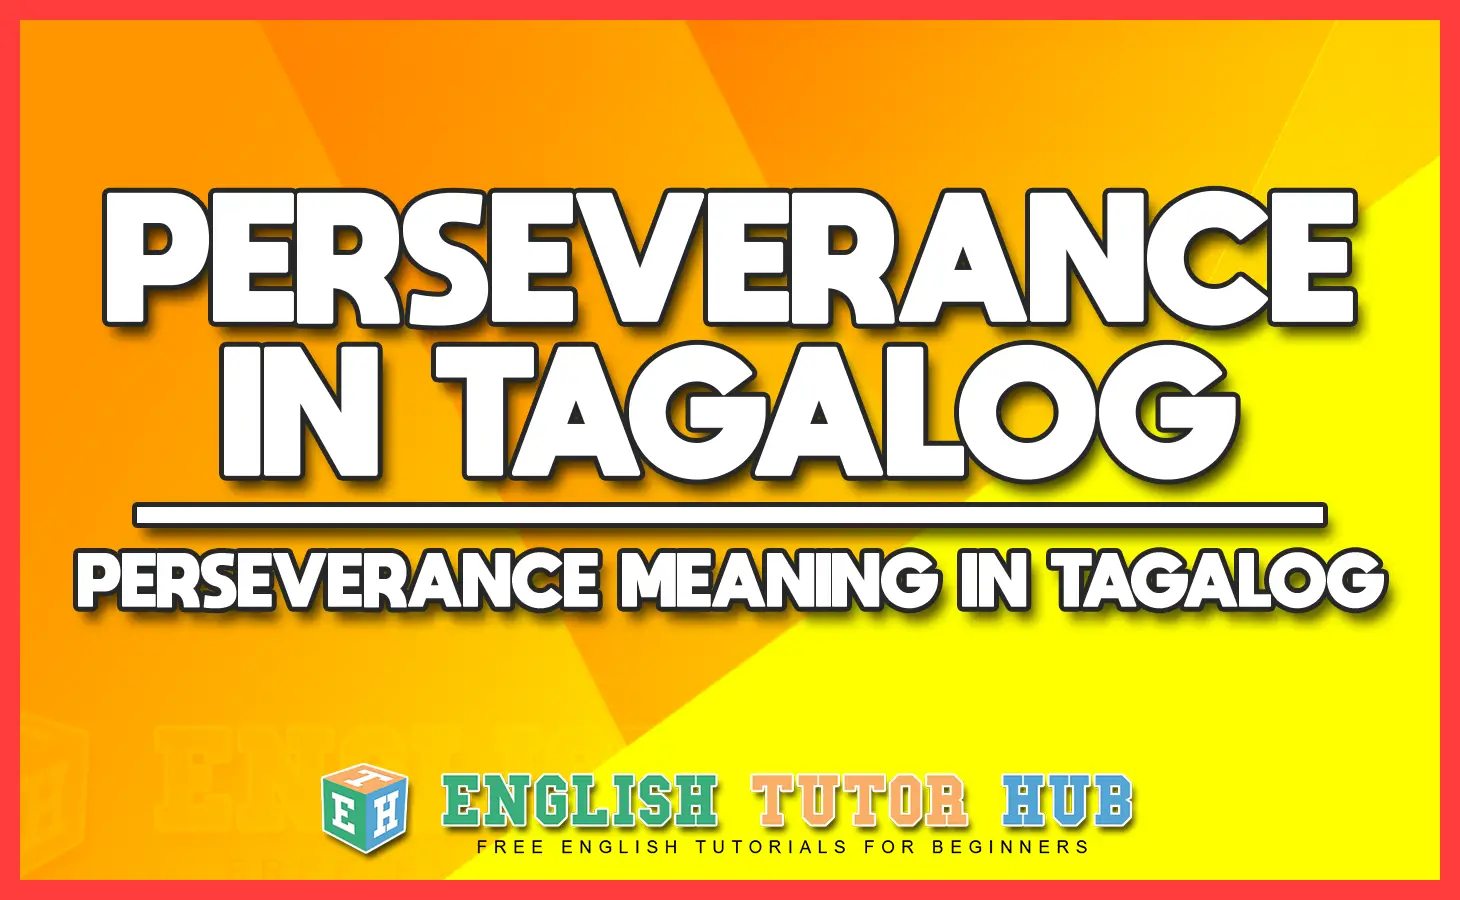 PERSEVERANCE IN TAGALOG - PERSEVERANCE MEANING IN TAGALOG